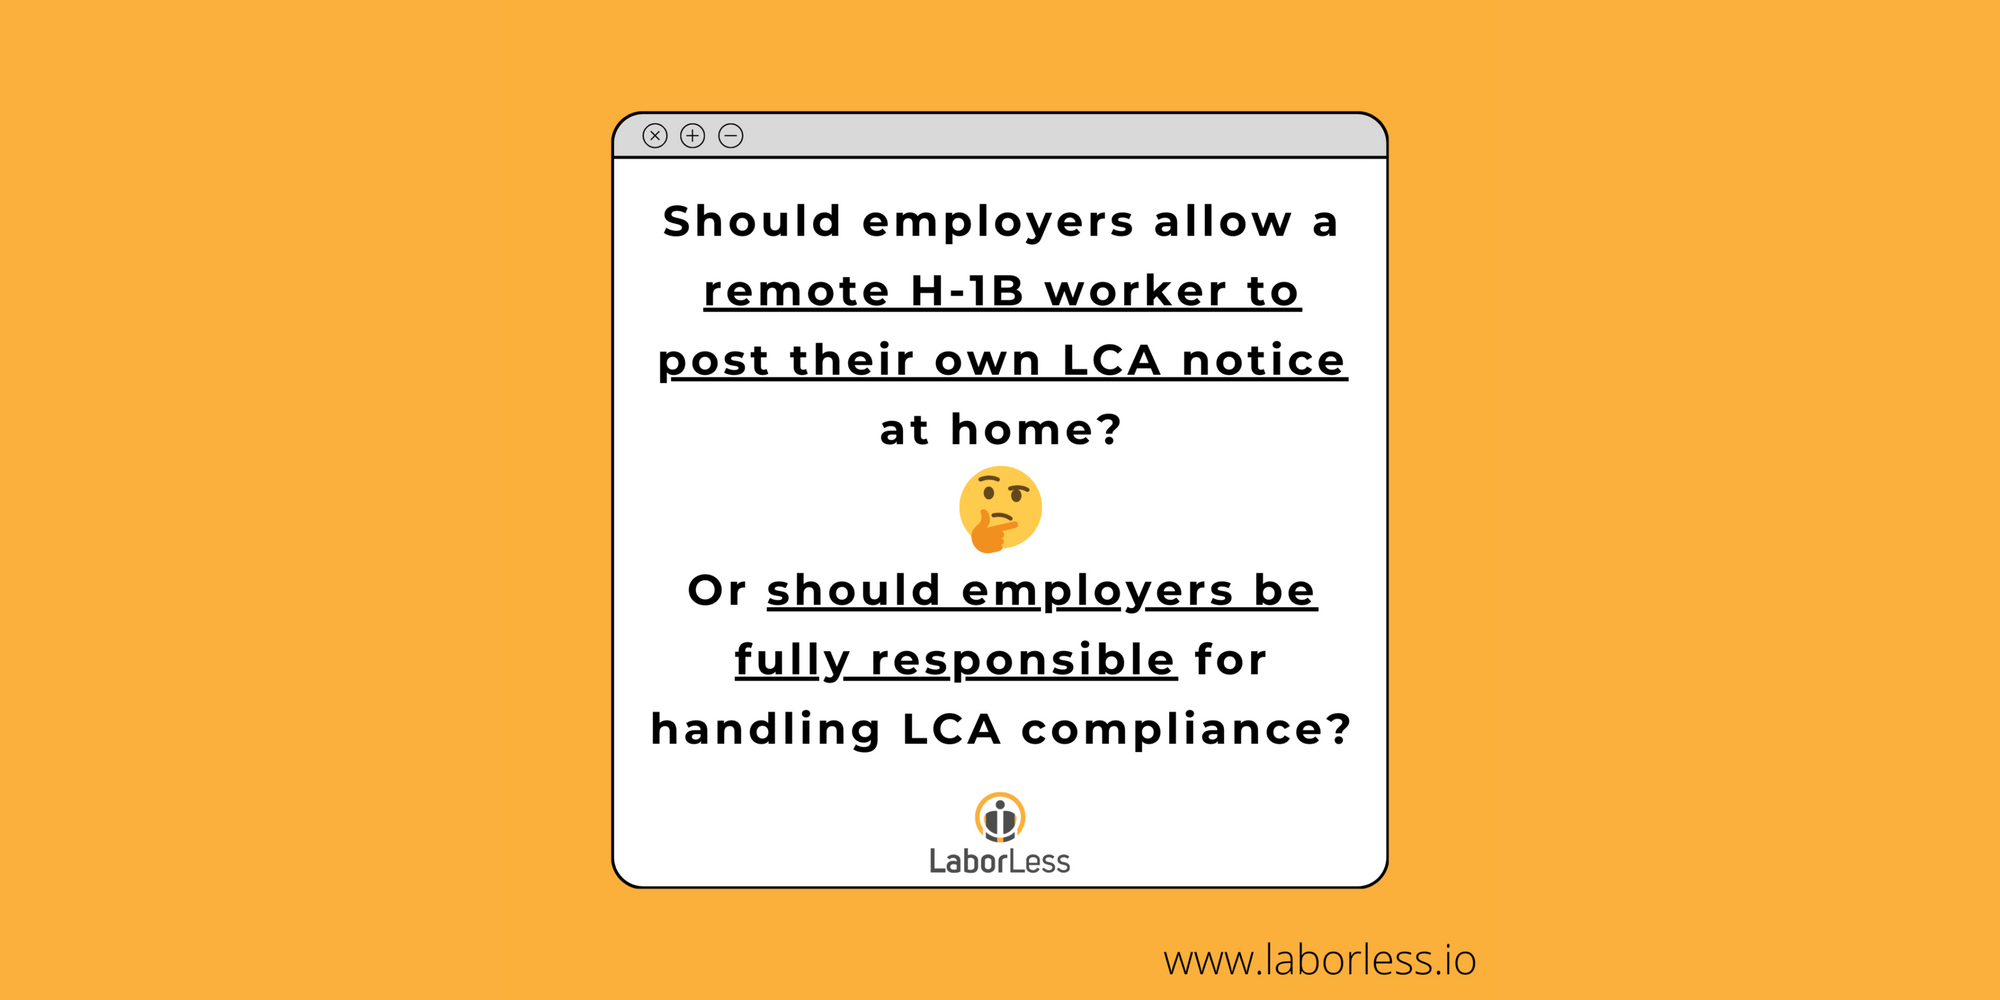 Should Employers Allow H-1B Workers to Post Their Own LCA Notices at Home?